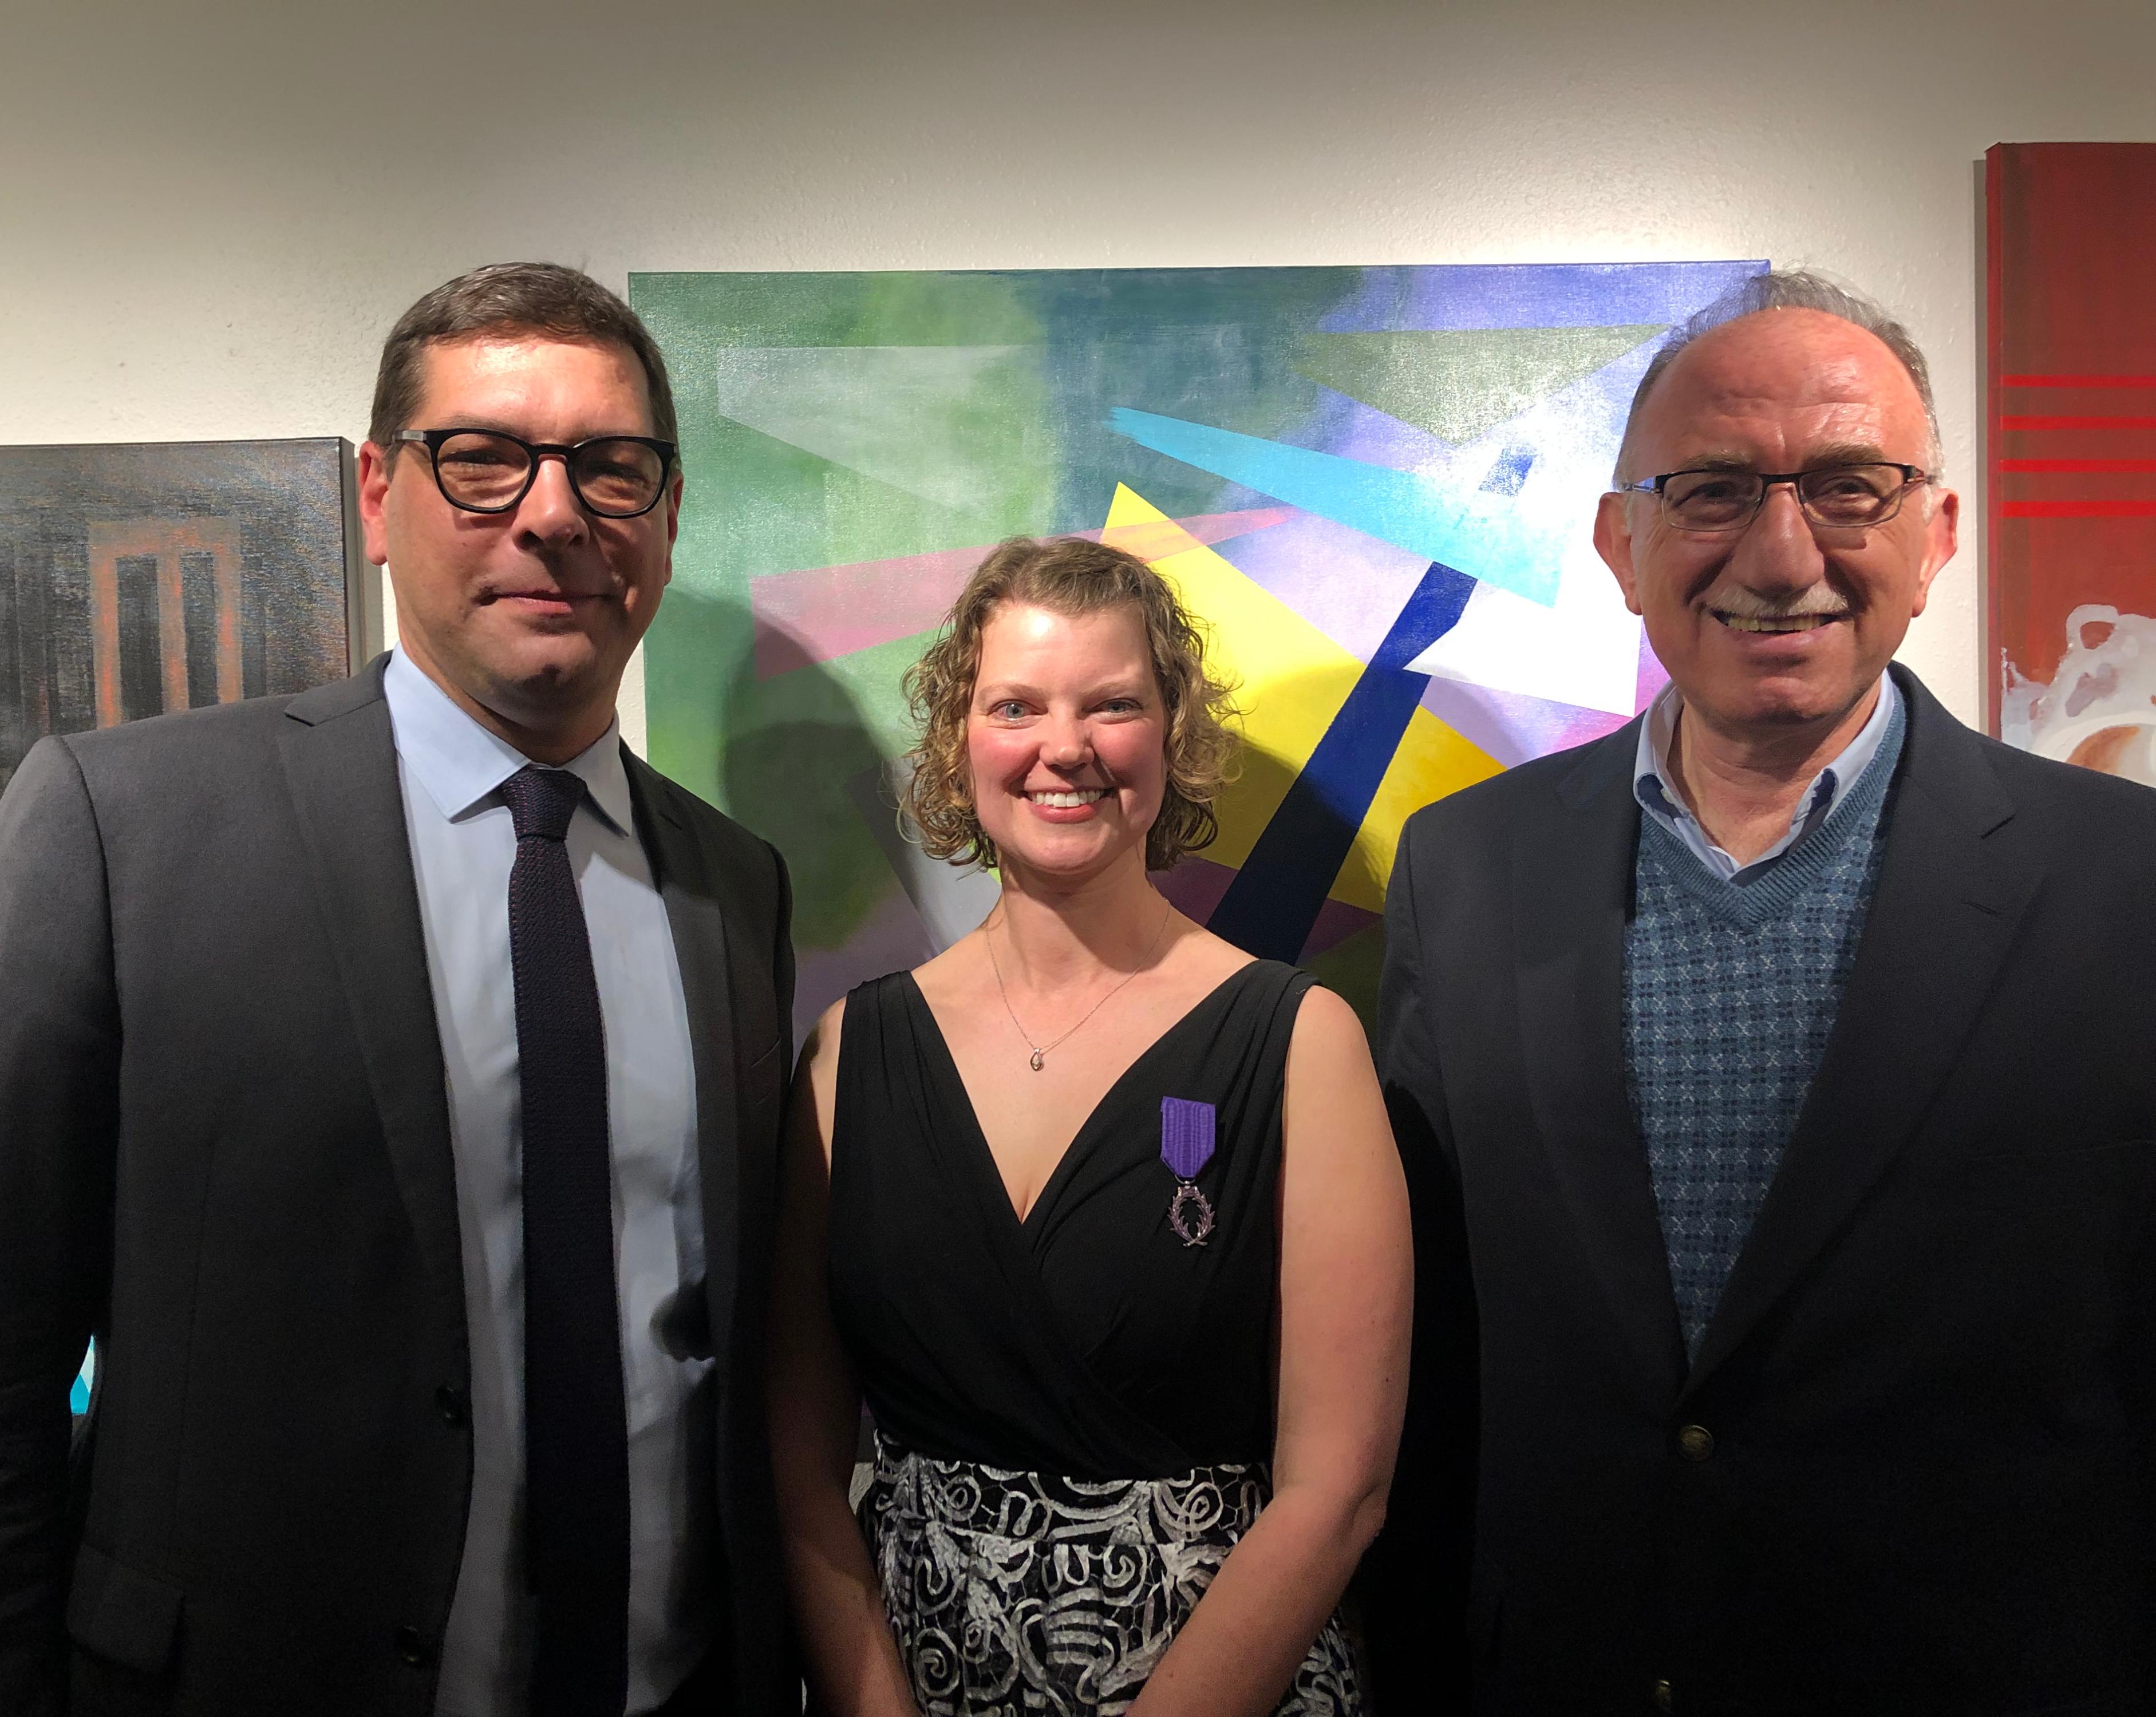 Megan Diercks, center, with the French Consul General and HASS Director Hussein Amery